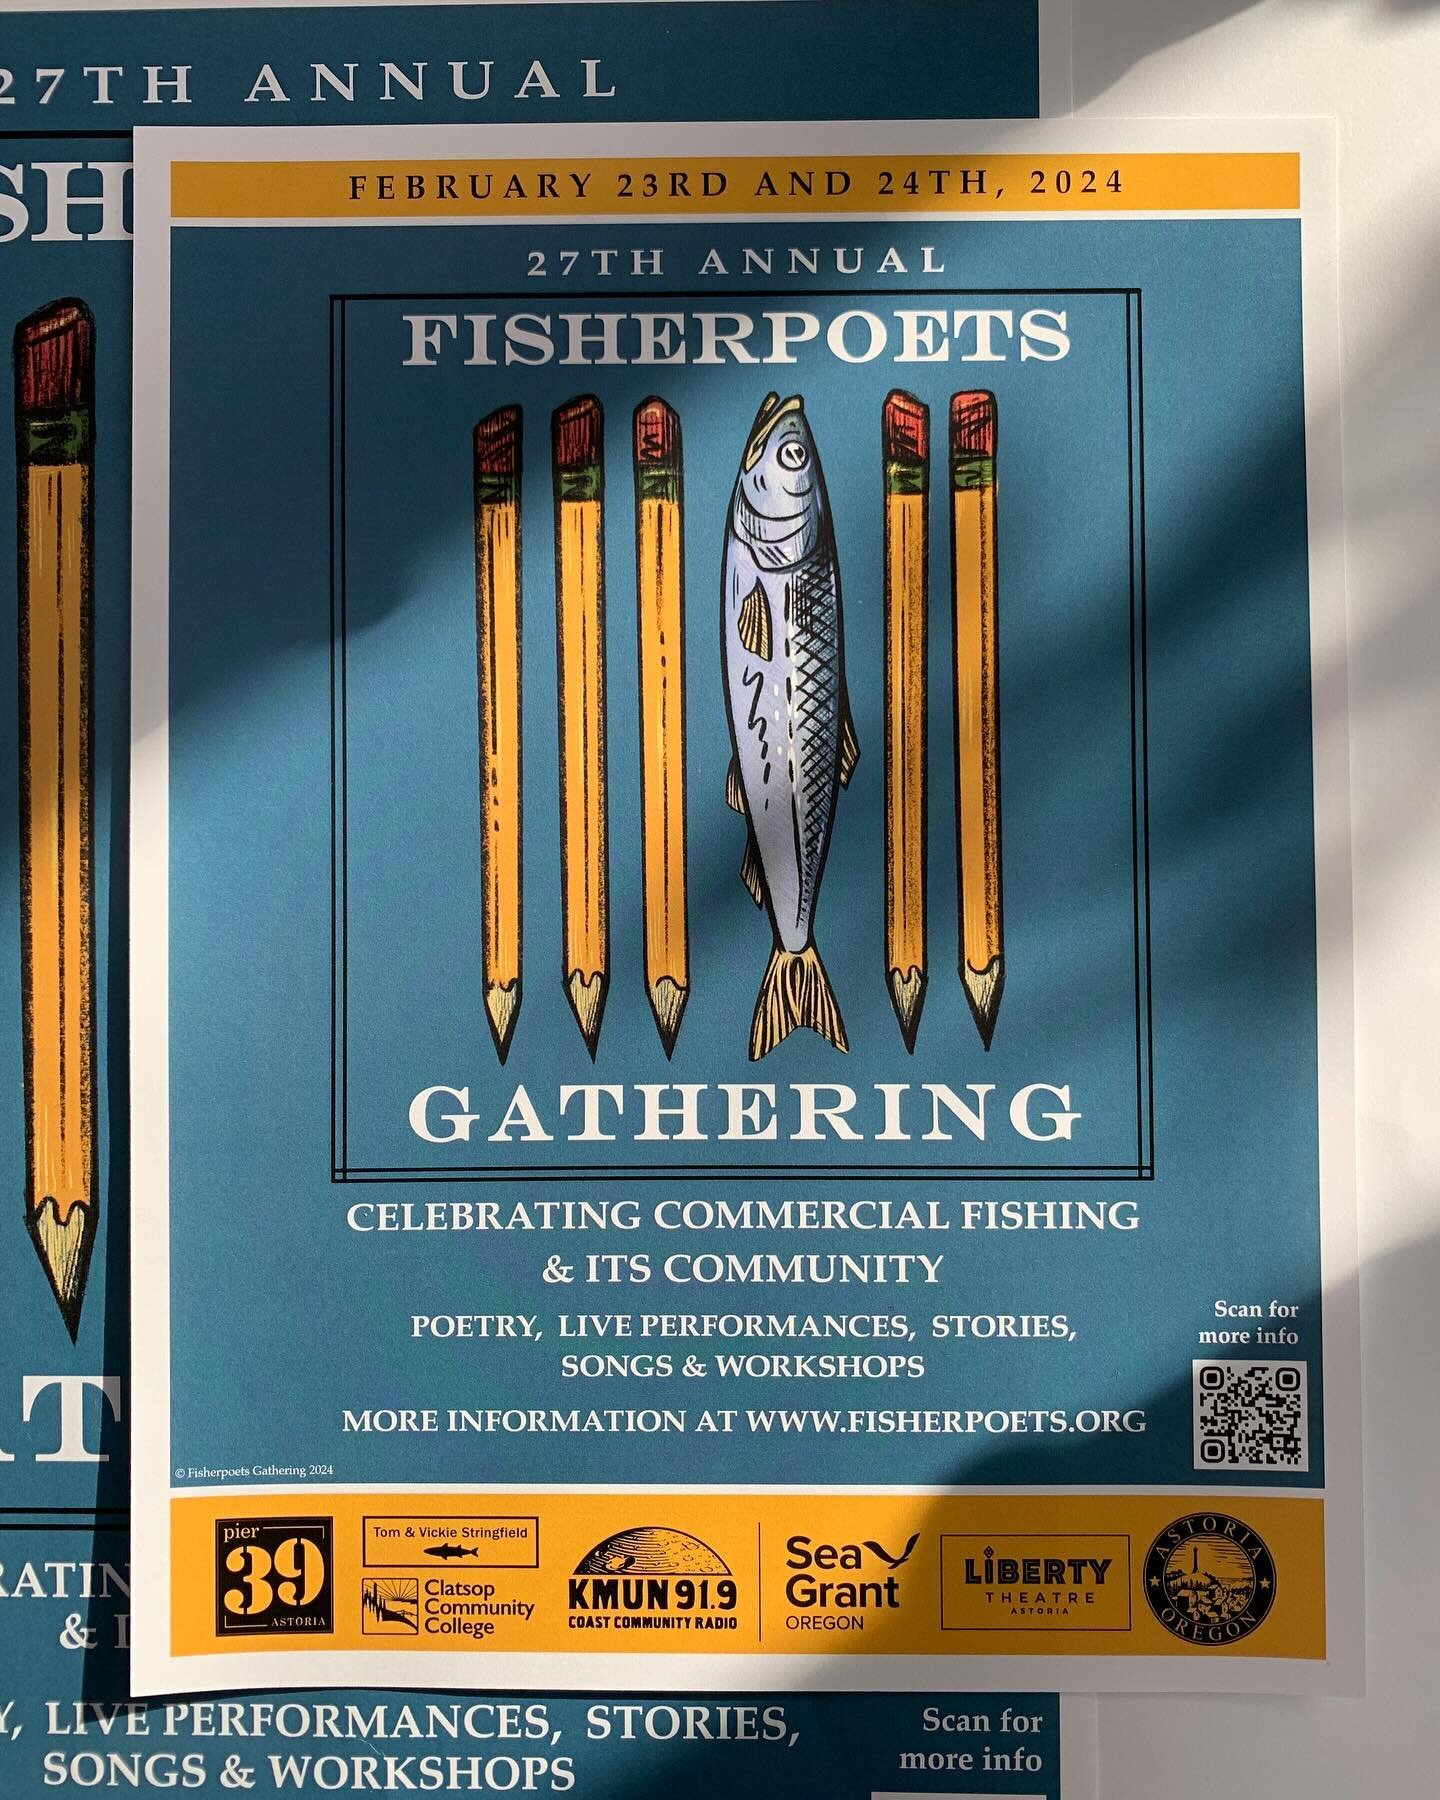 Proud of this year&rsquo;s FisherPoets Poster. My name isn&rsquo;t on it, but I am grateful I have had the opportunity to do a number of posters from start to finish (illustration, graphic design, layout, production). Swipe for the raw digital illust